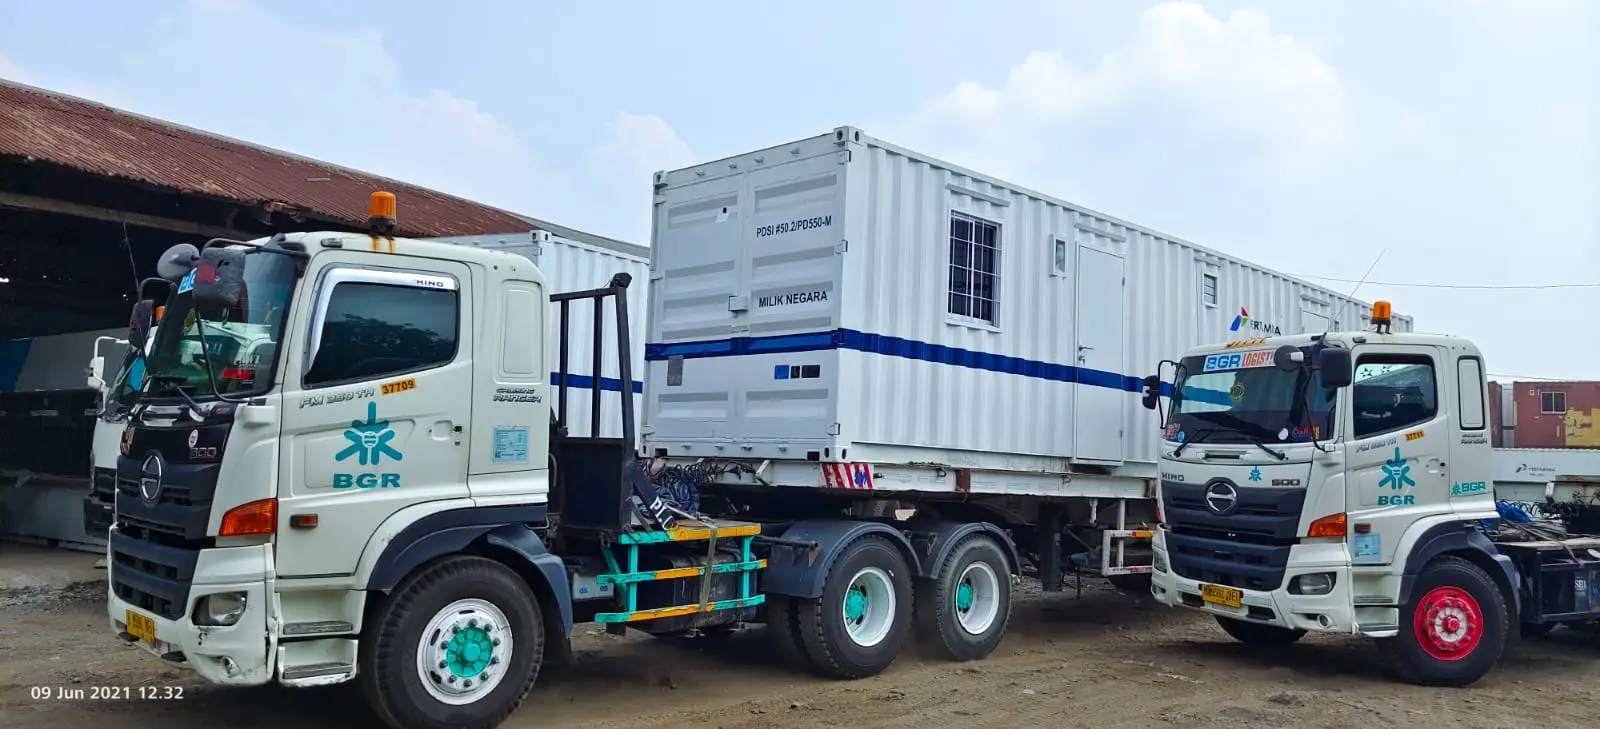 jual container